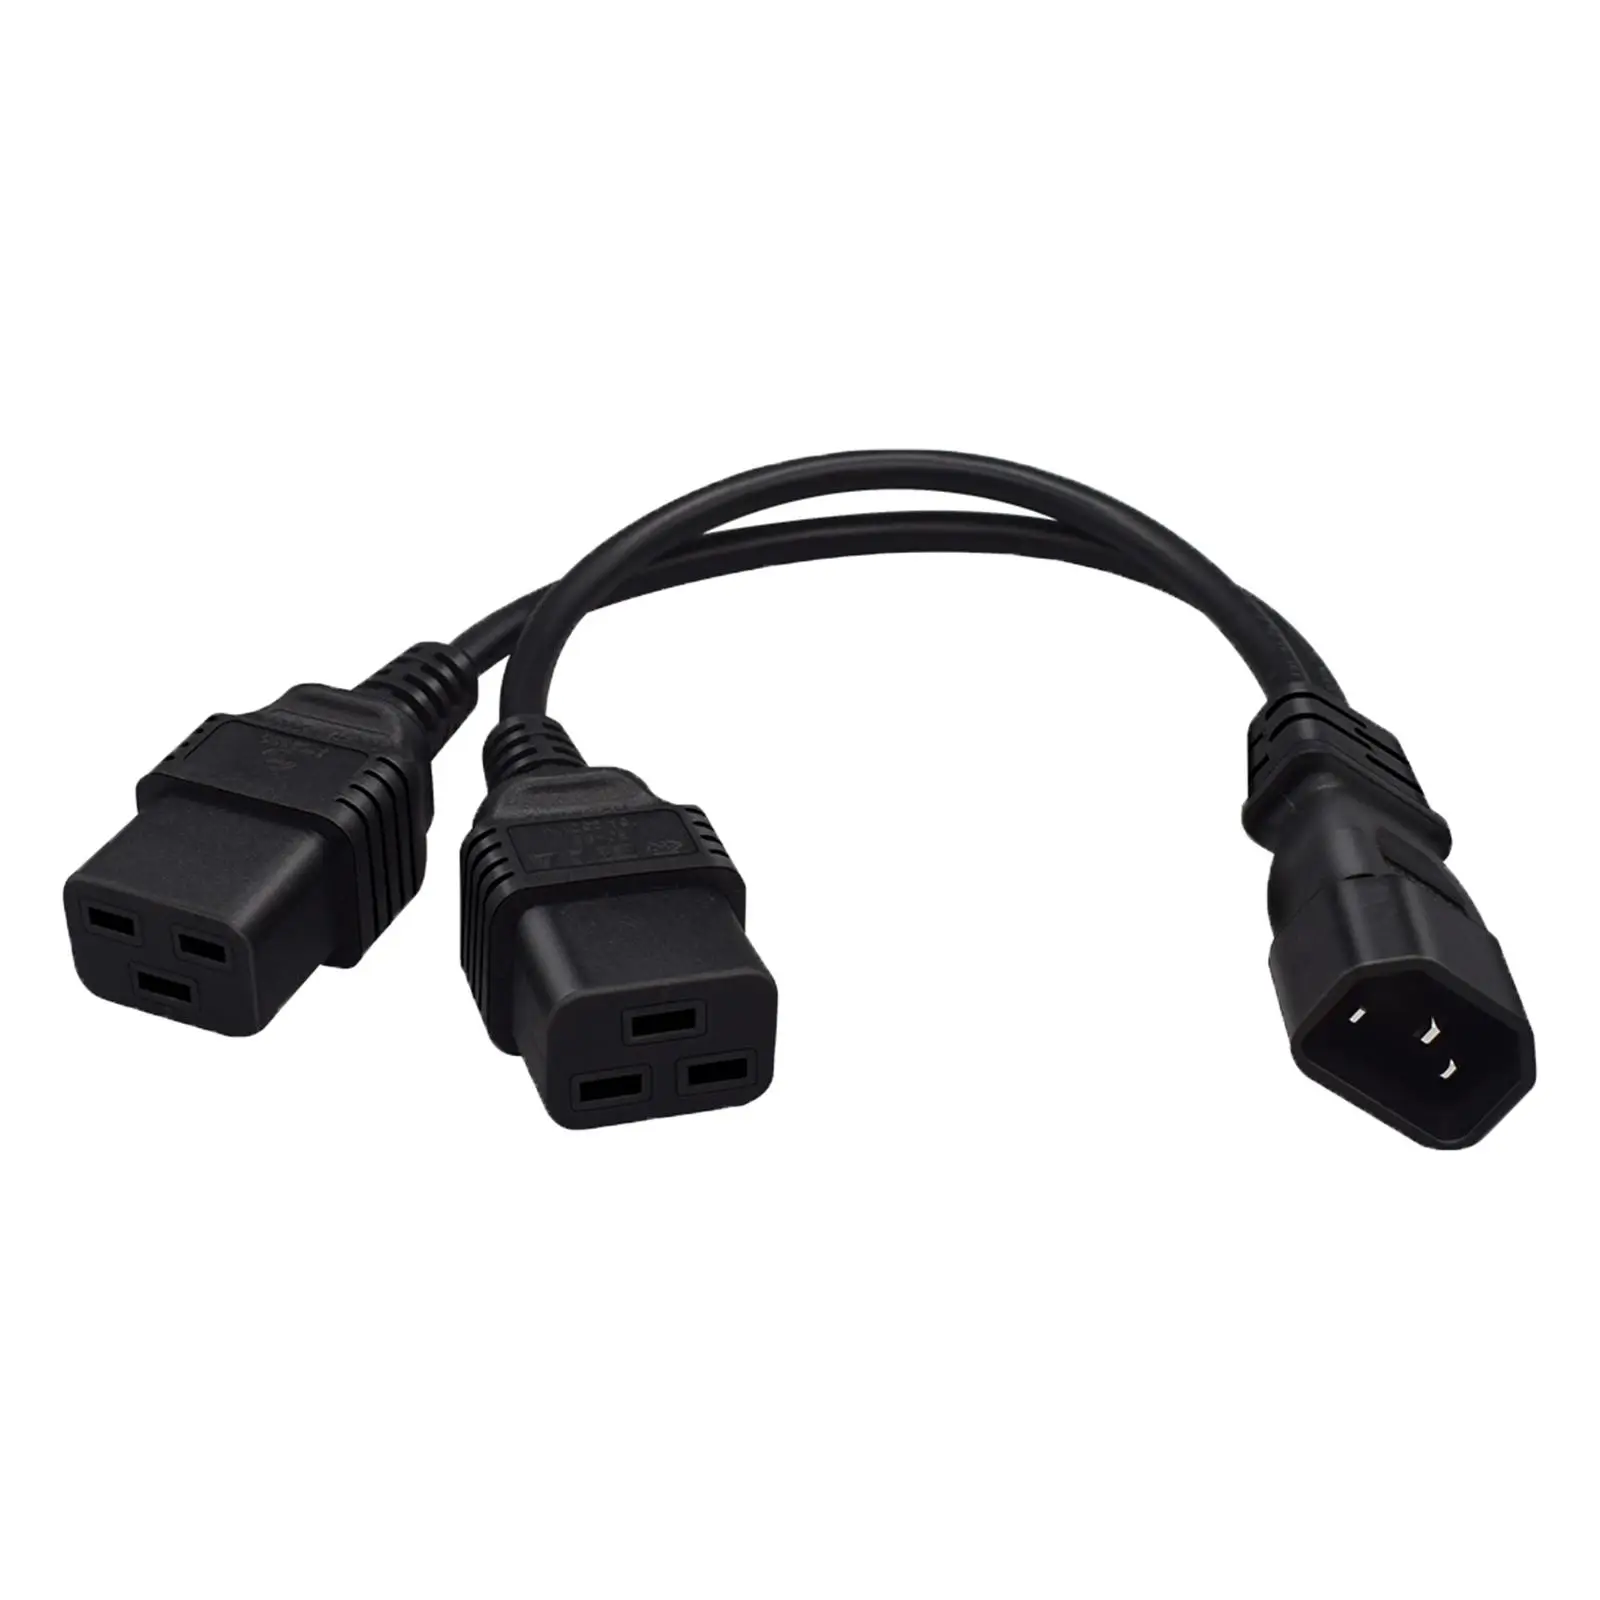 IEC320 C14 to IEC320 C19 Y Splitter Convertor 30cm Cord Extension Pdu Ups Cord Splitter for PC Monitor Scanner